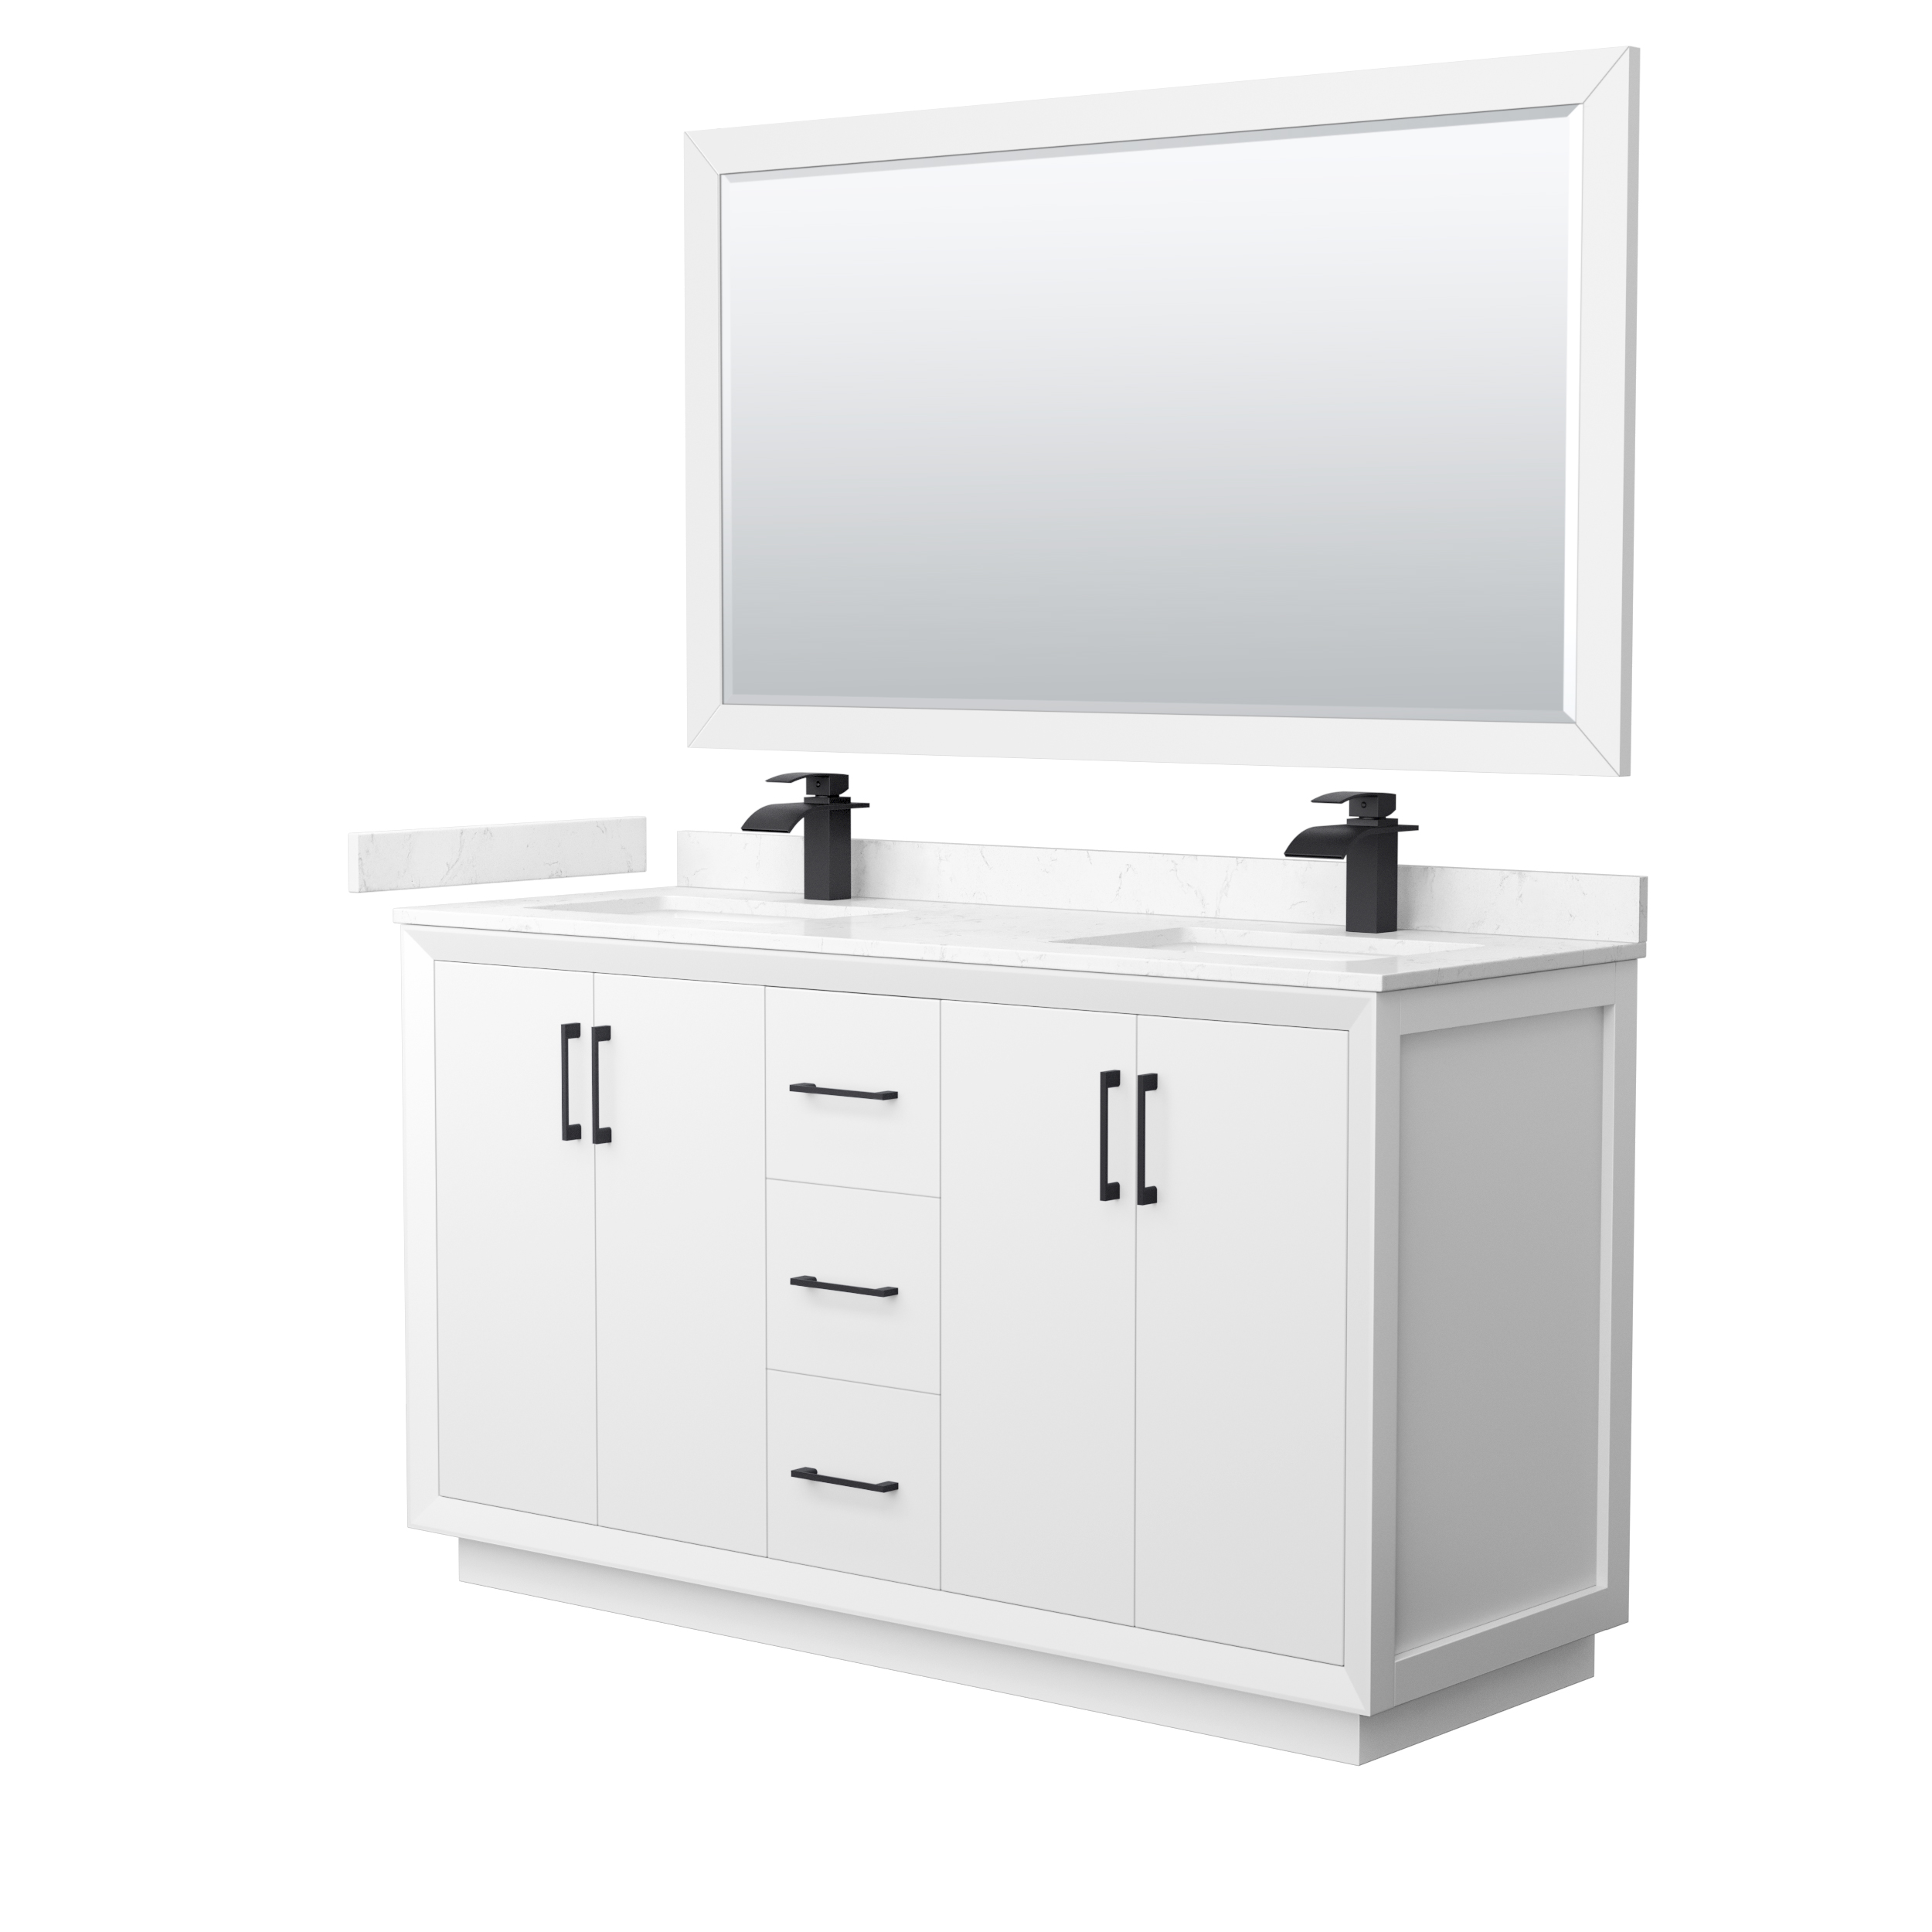 Strada 60" Double Vanity with optional Cultured Marble Counter - White WC-4141-60-DBL-VAN-WHT-